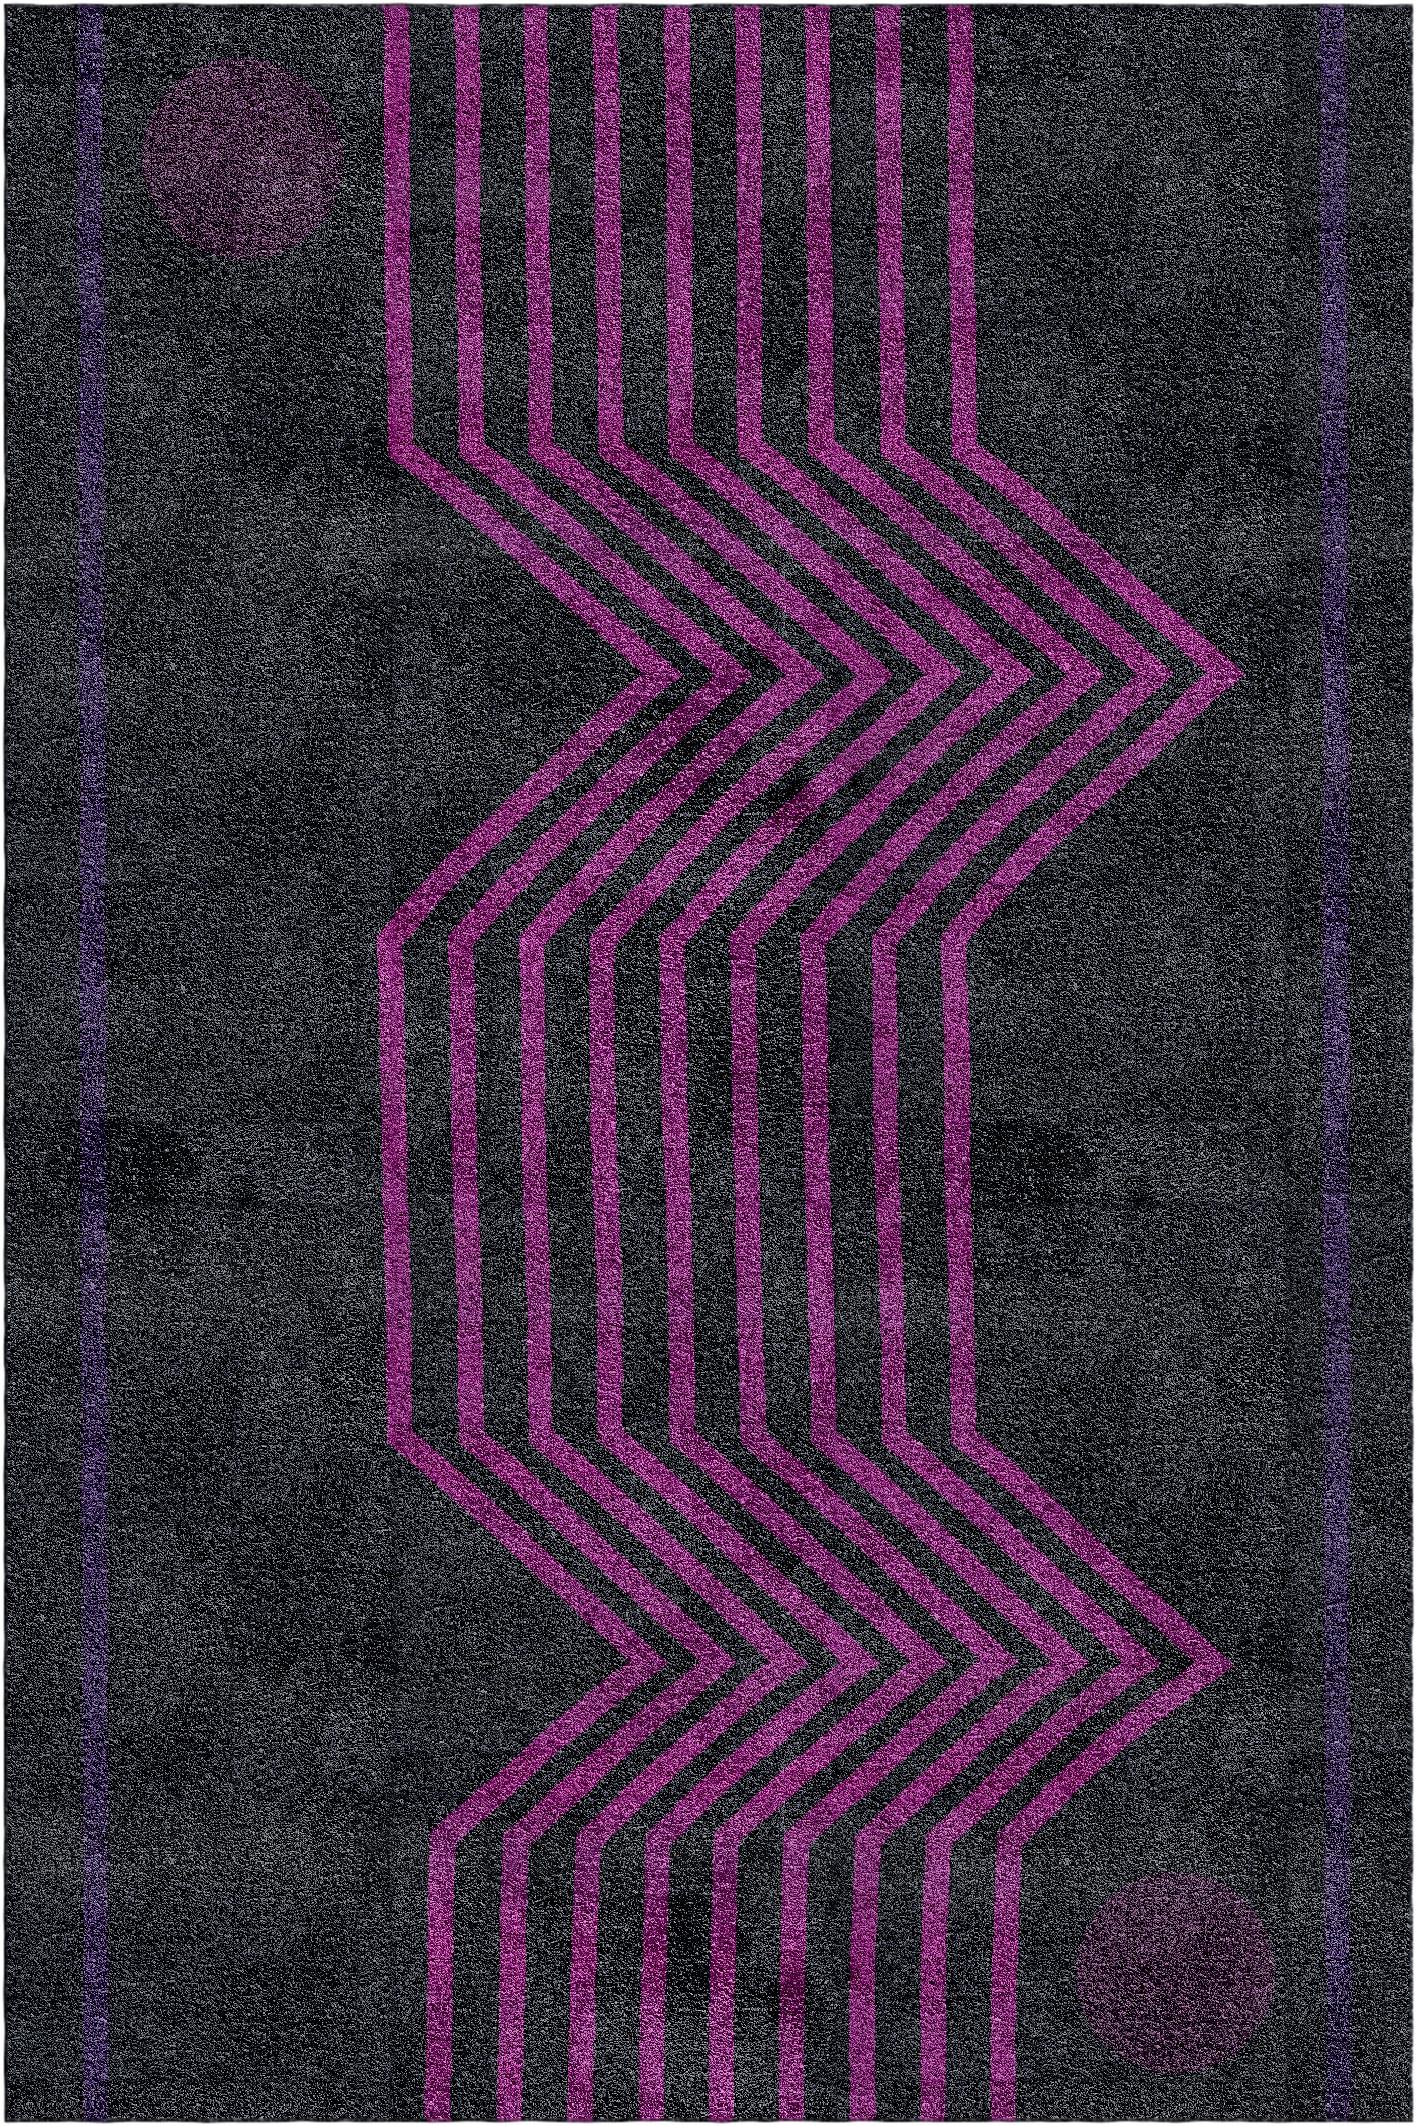 Hand-Crafted Futuro Rug V by Vanessa Ordoñez For Sale